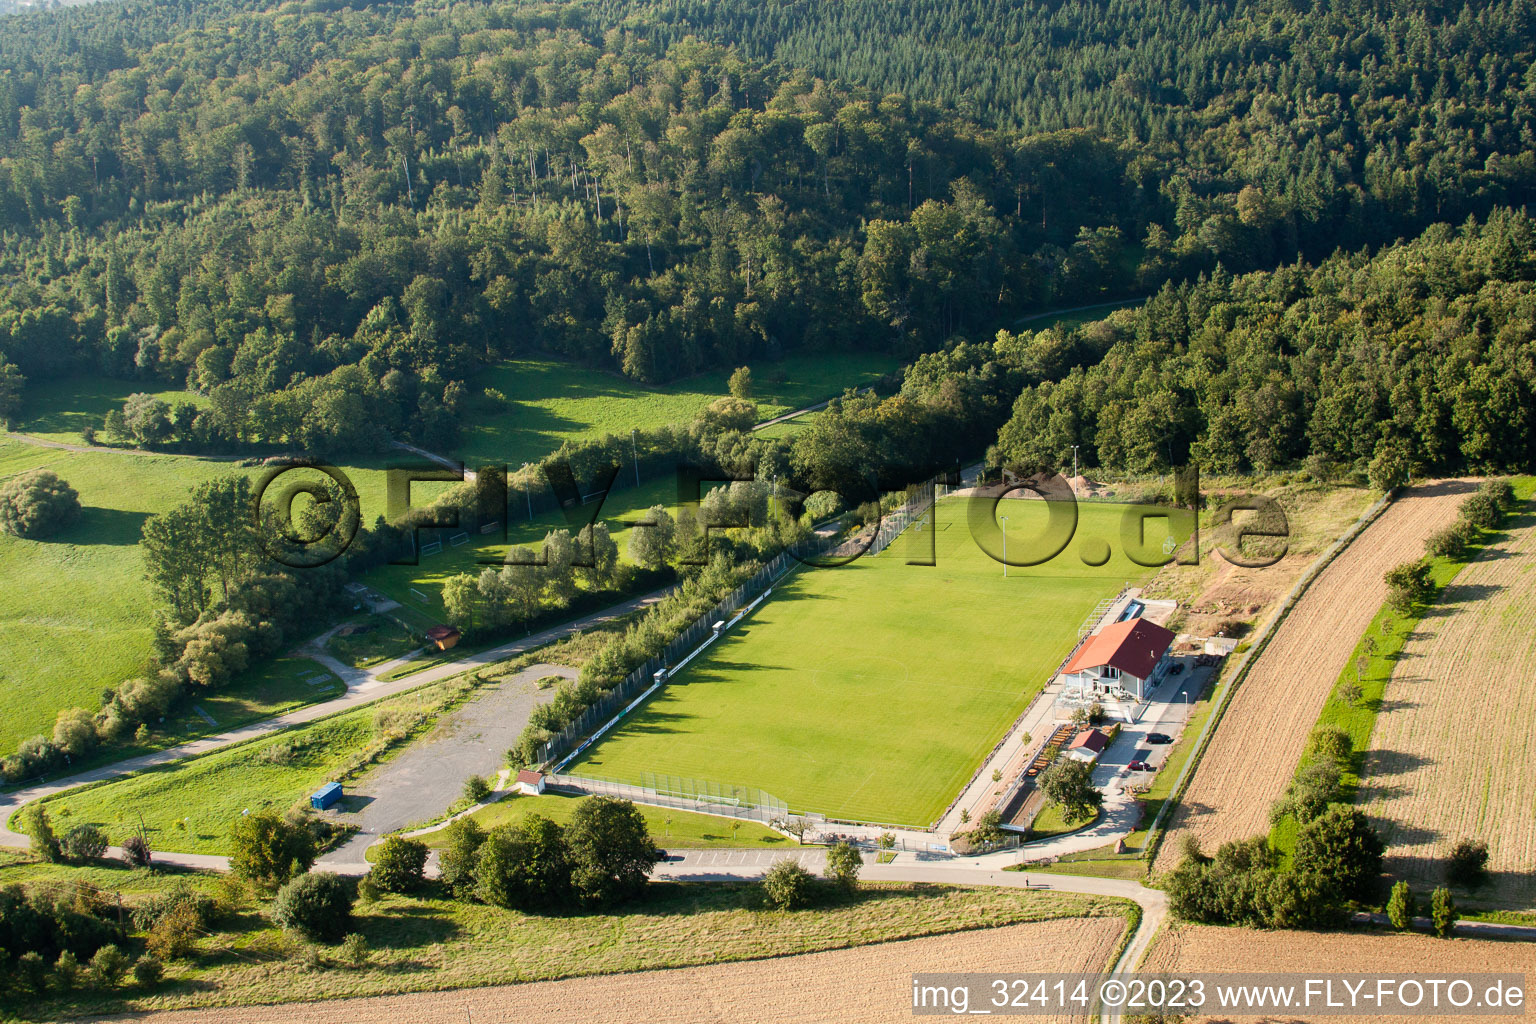 Pneuhage Stadium in the district Auerbach in Karlsbad in the state Baden-Wuerttemberg, Germany from the drone perspective